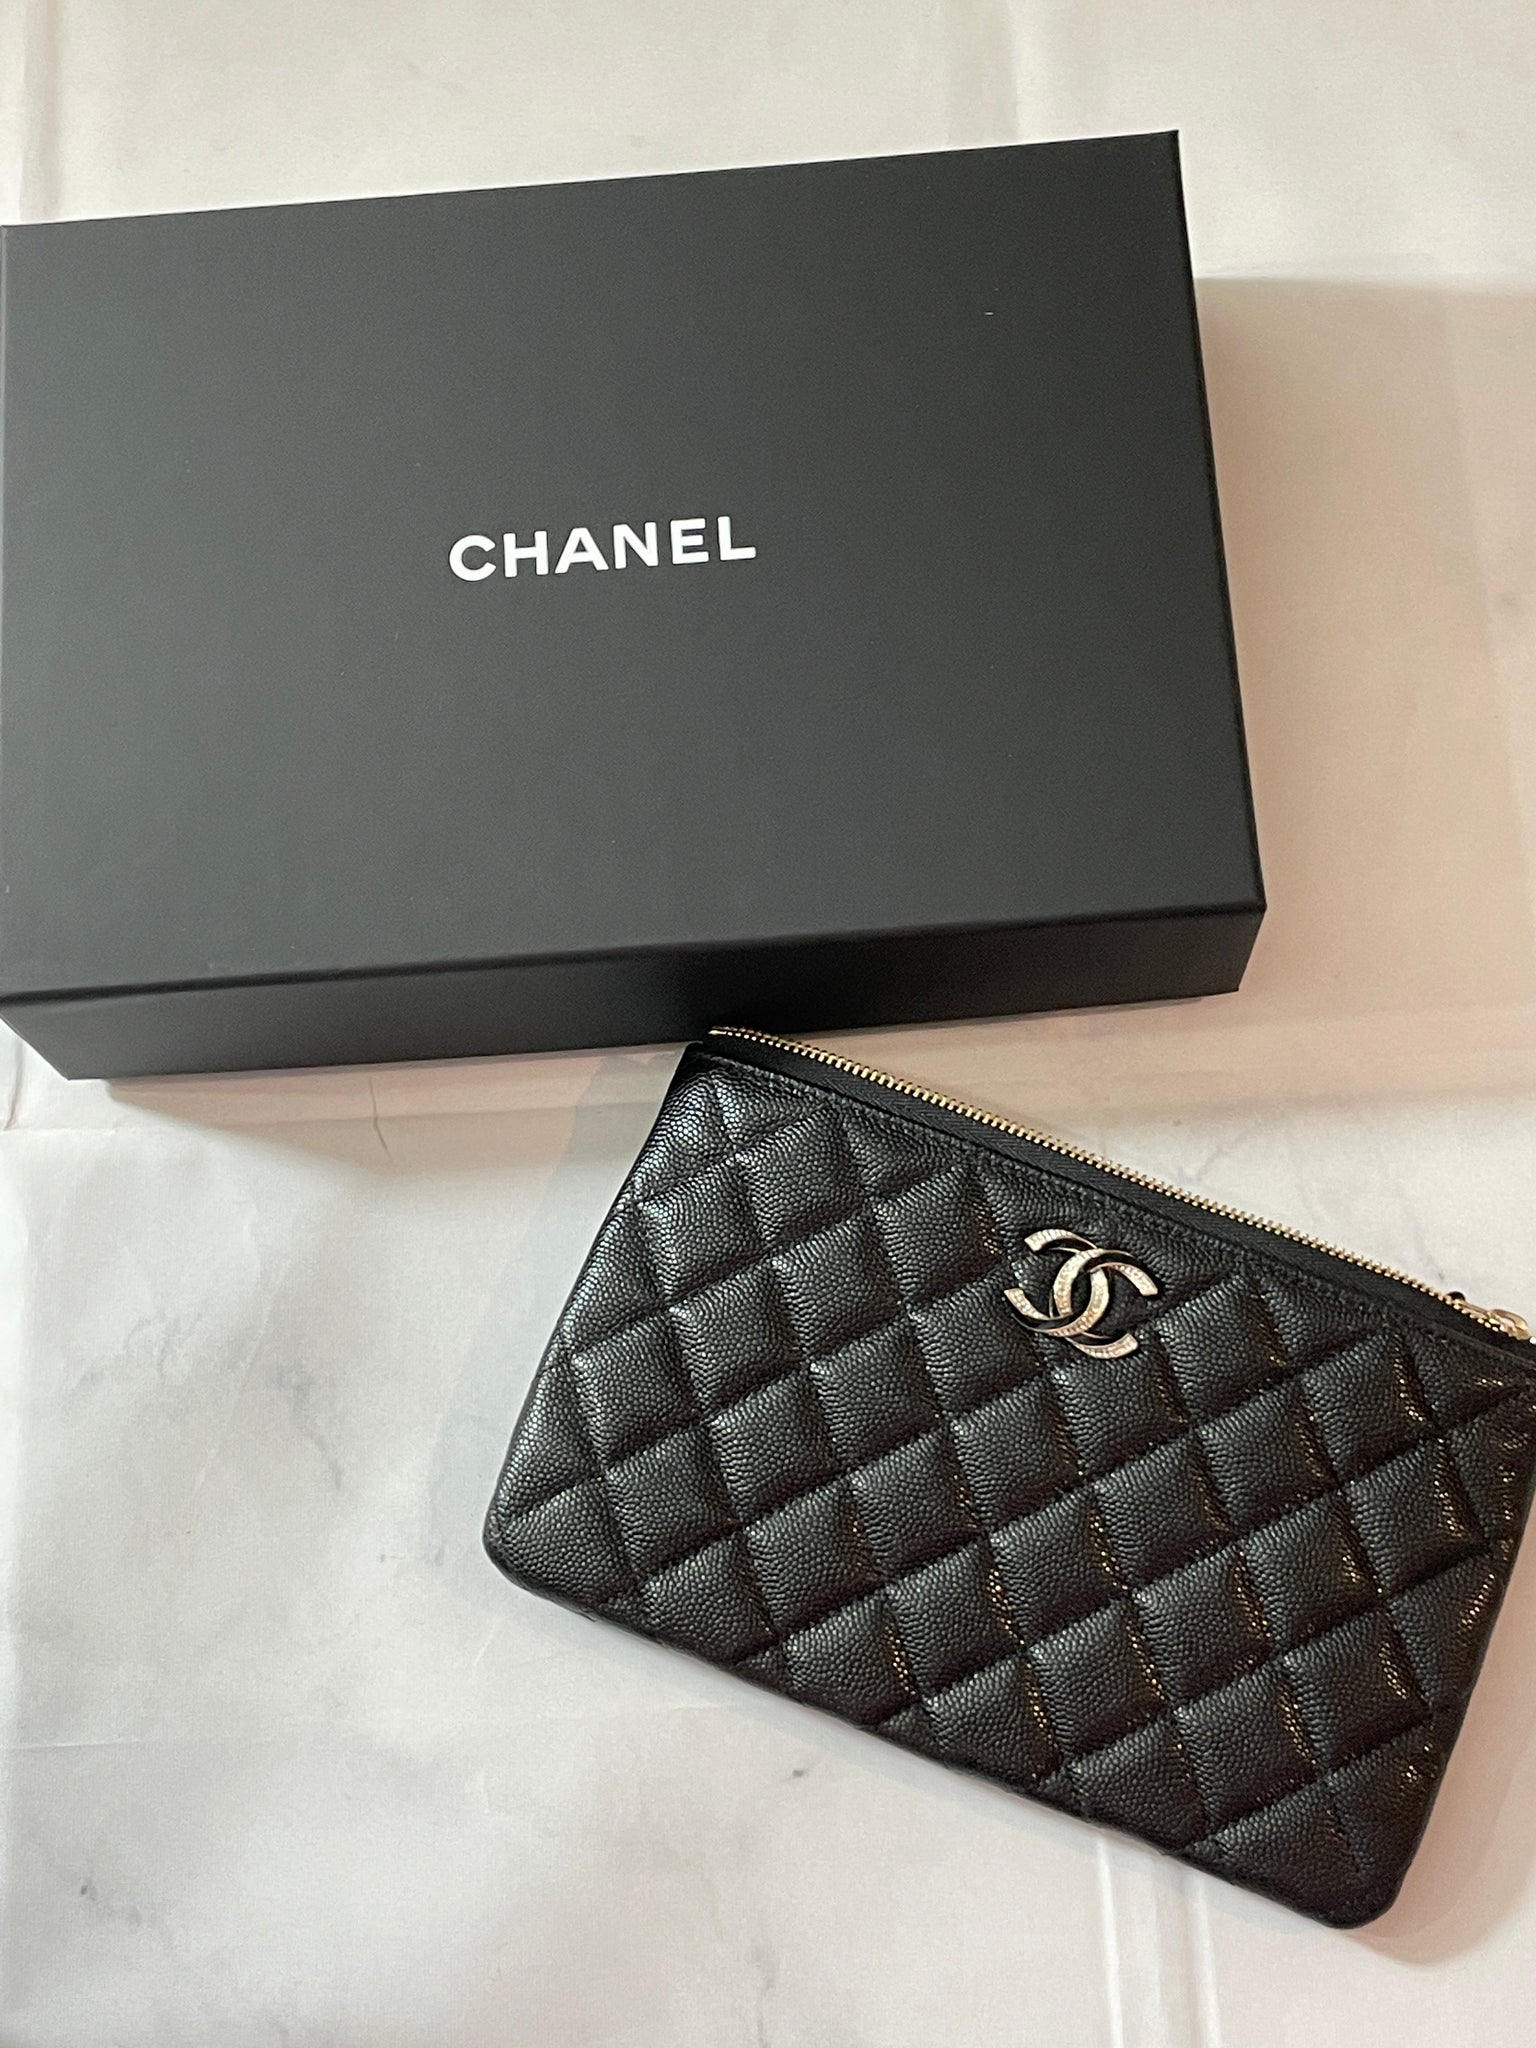 Chanel Fall/Winter 2020 Small Leather Goods Collection - Spotted Fashion